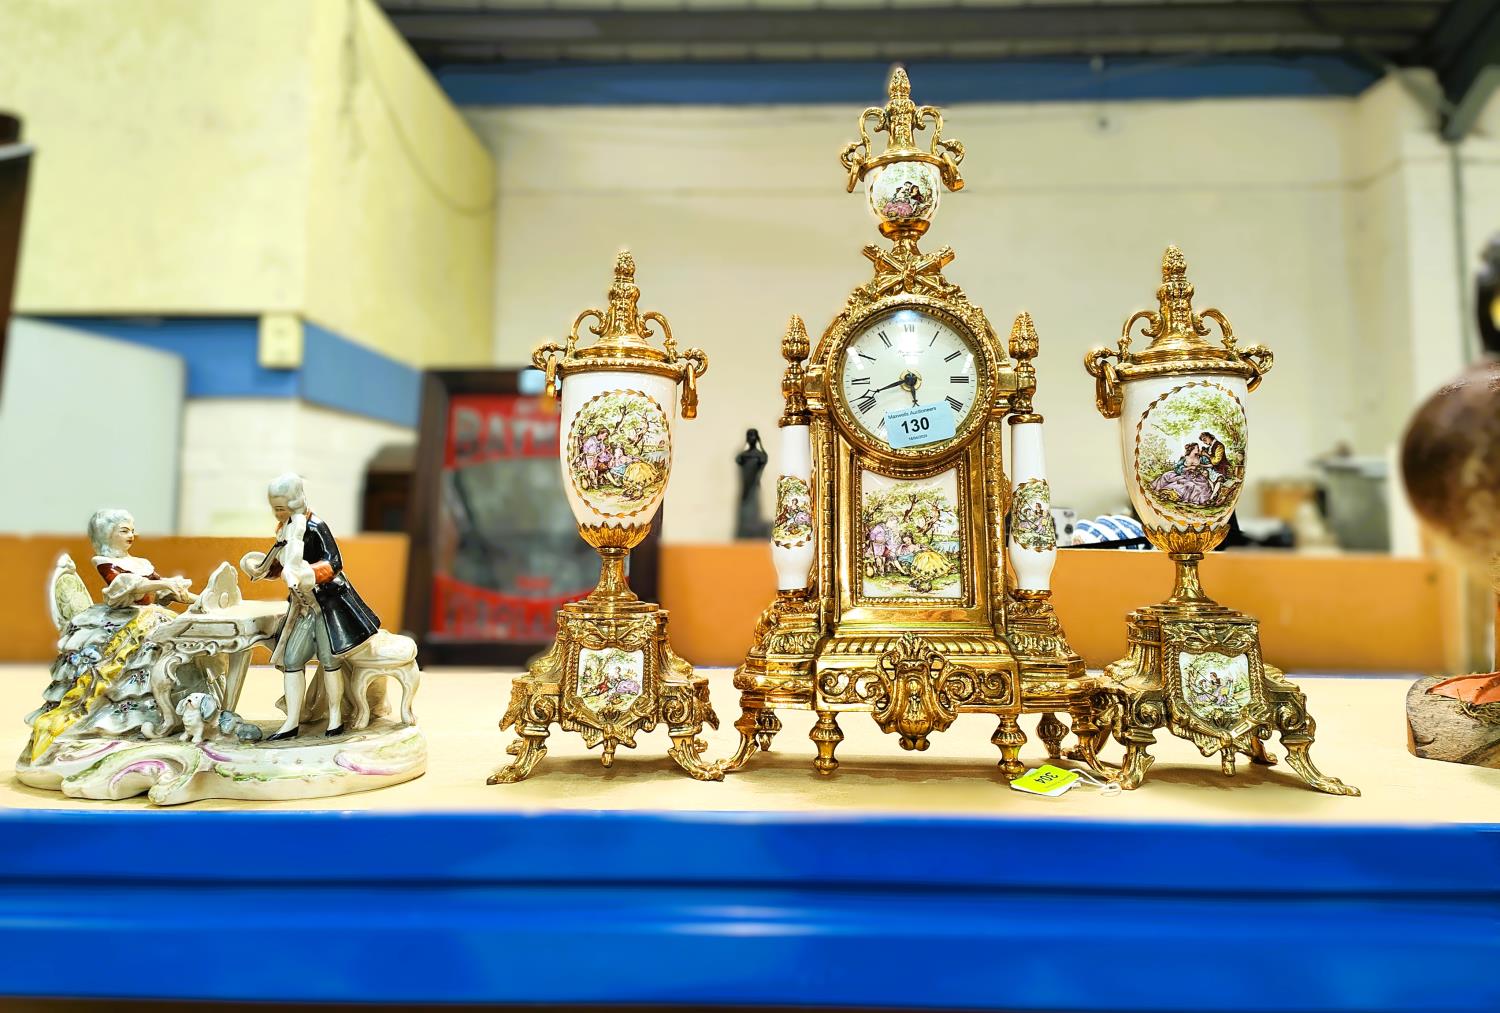 A traditional ceramic and metal three piece clock garniture with quartz movement, a Dresden style